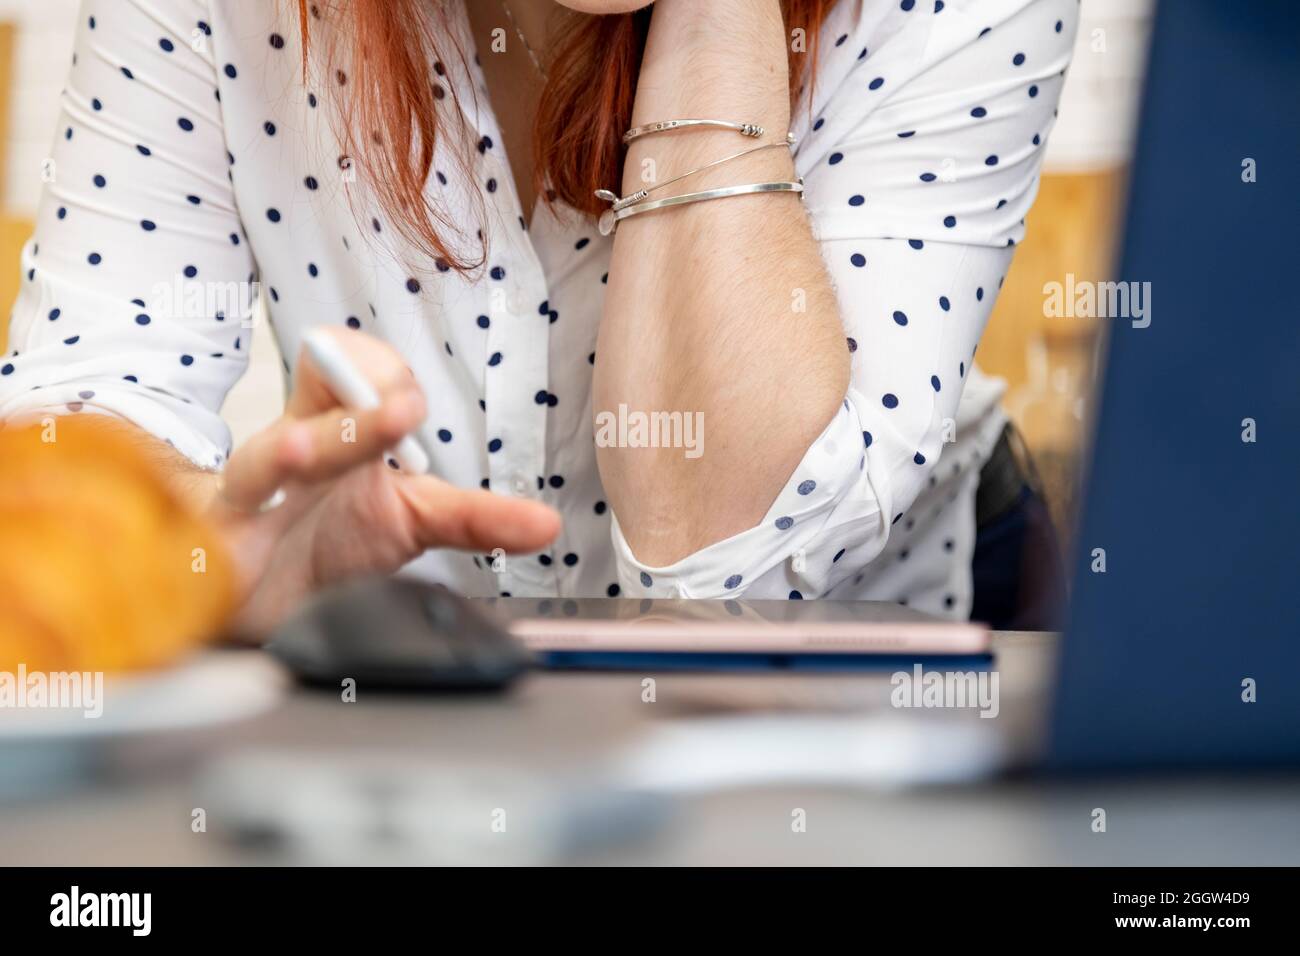 woman draws on a digital tablet with a touch screen. no face. close-up. Stock Photo